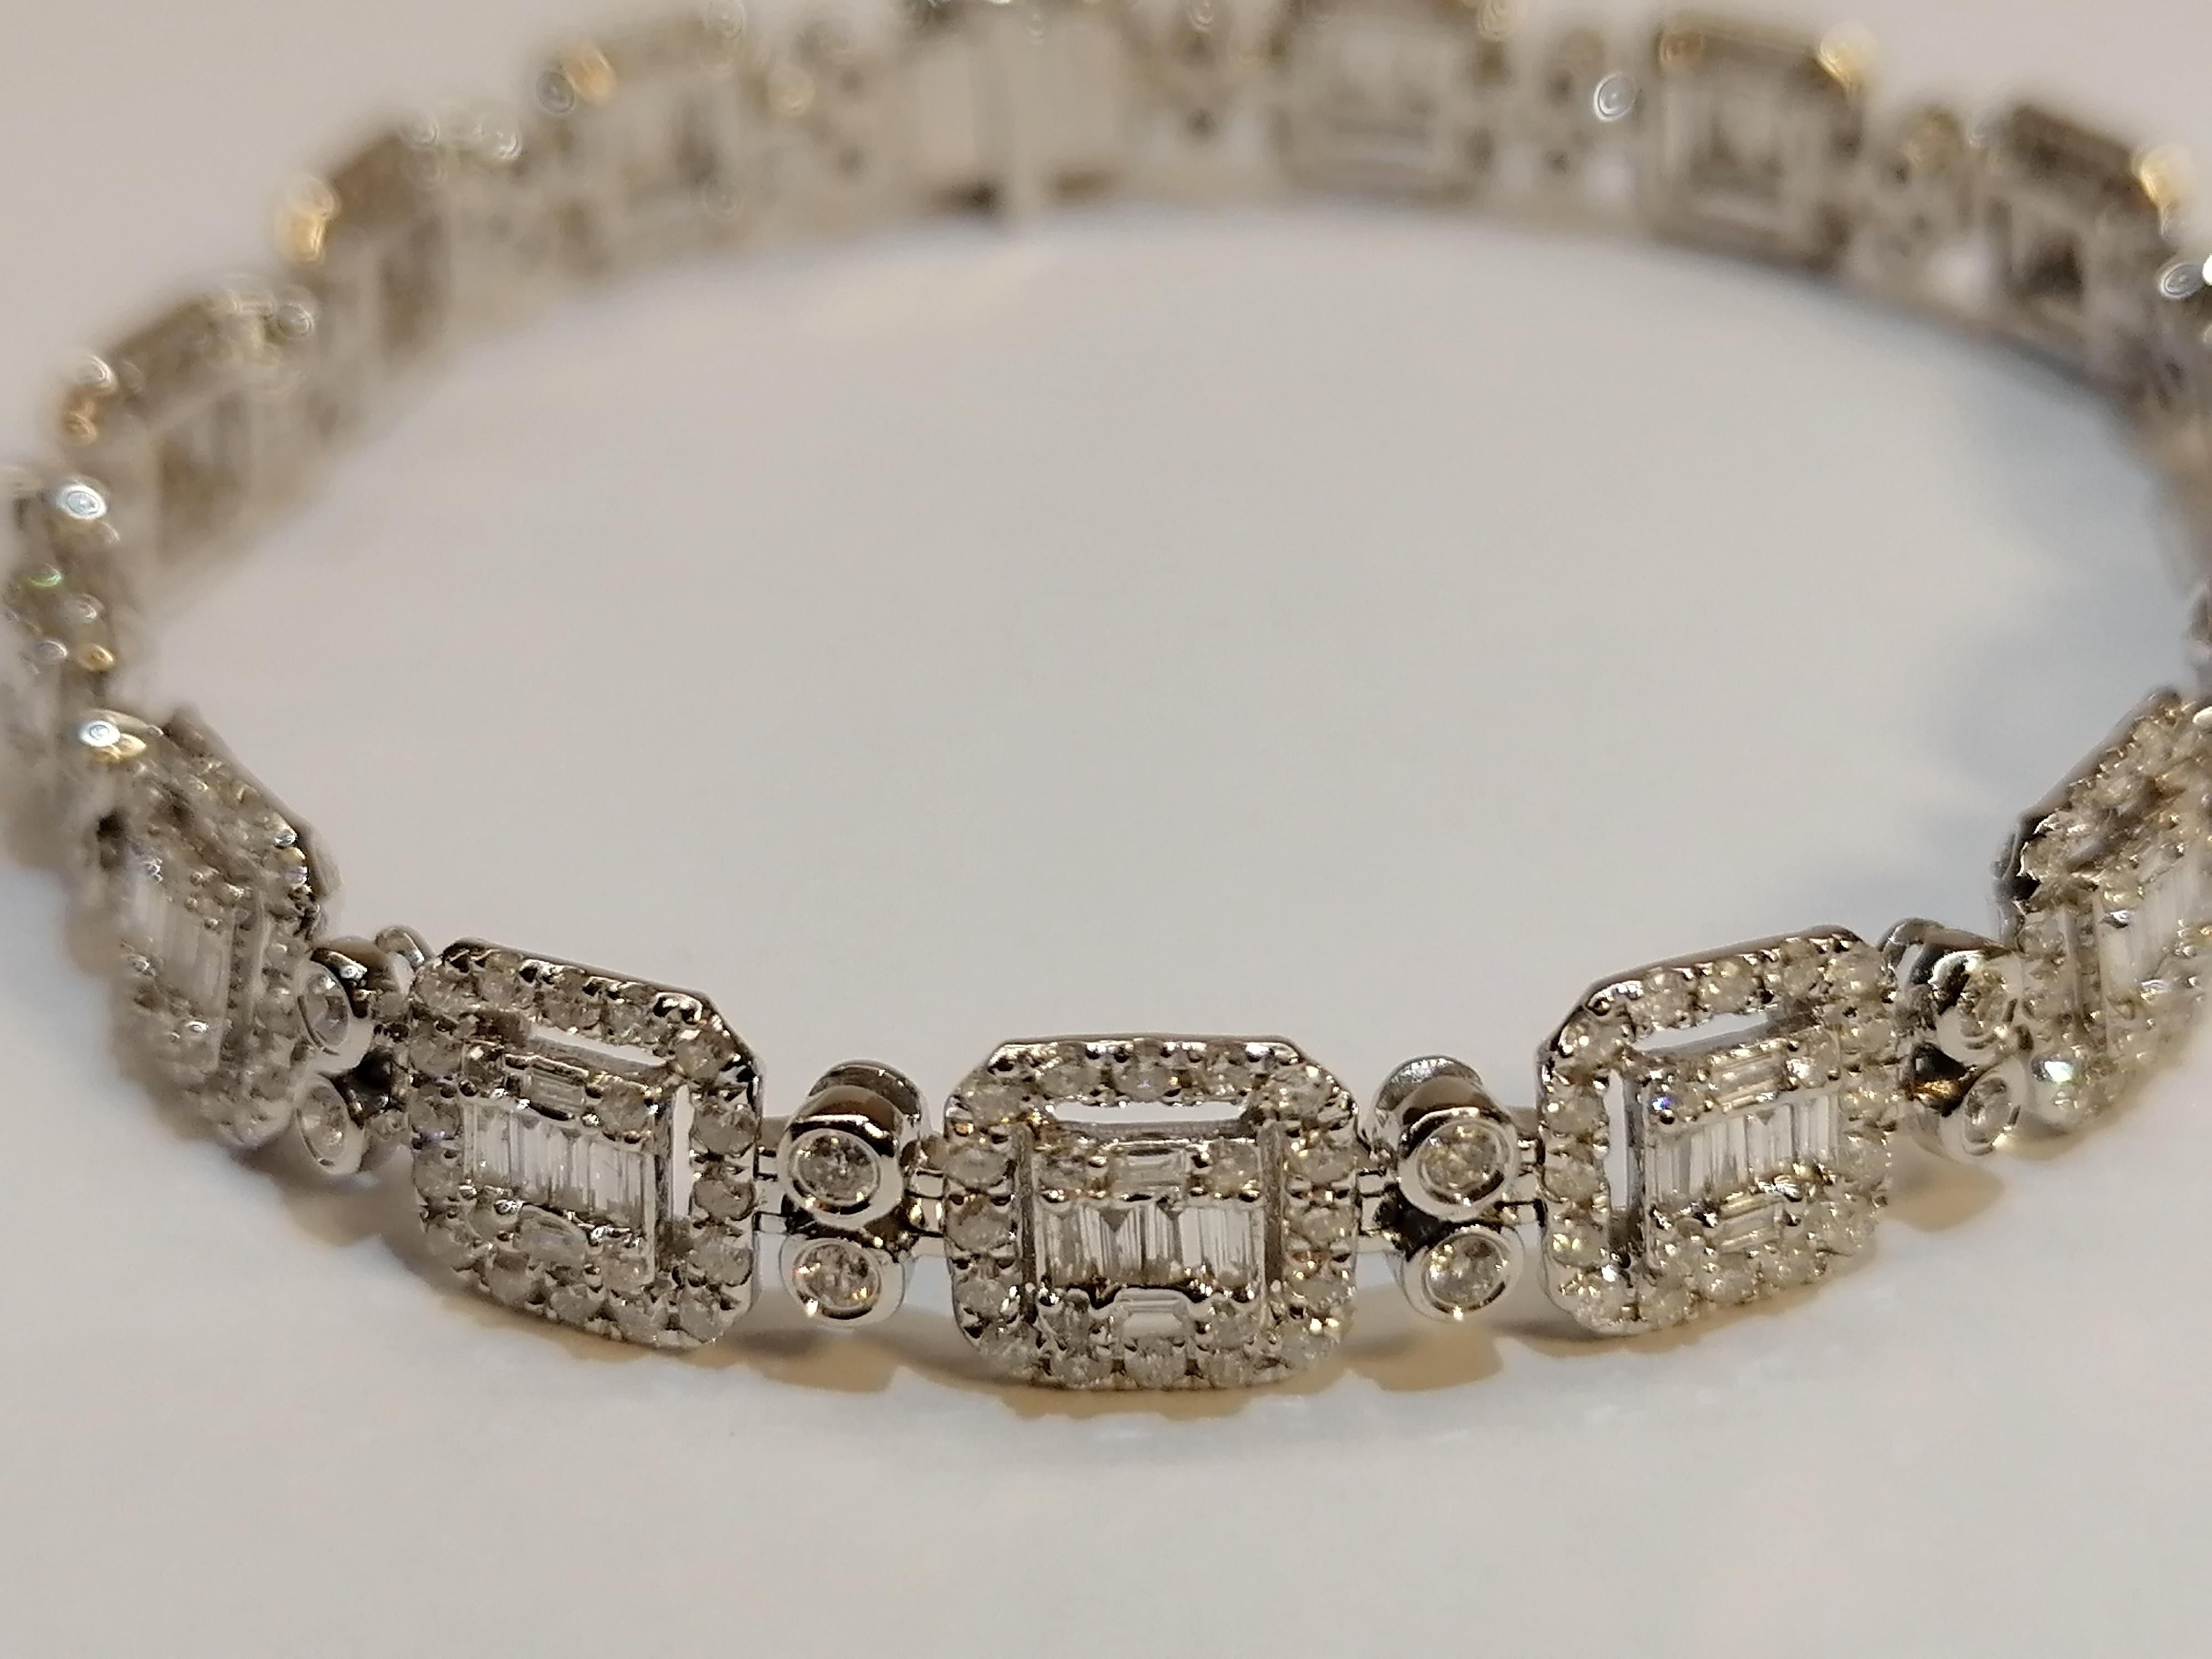 Amazing and new 6 carats diamond necklace handmade in Italy by an expert goldsmith. This bracelet has baguette and brilliant cut diamonds all VS in clarity and F in color.

Made with 100% natural earth mined diamonds this bracelet is to dream of!